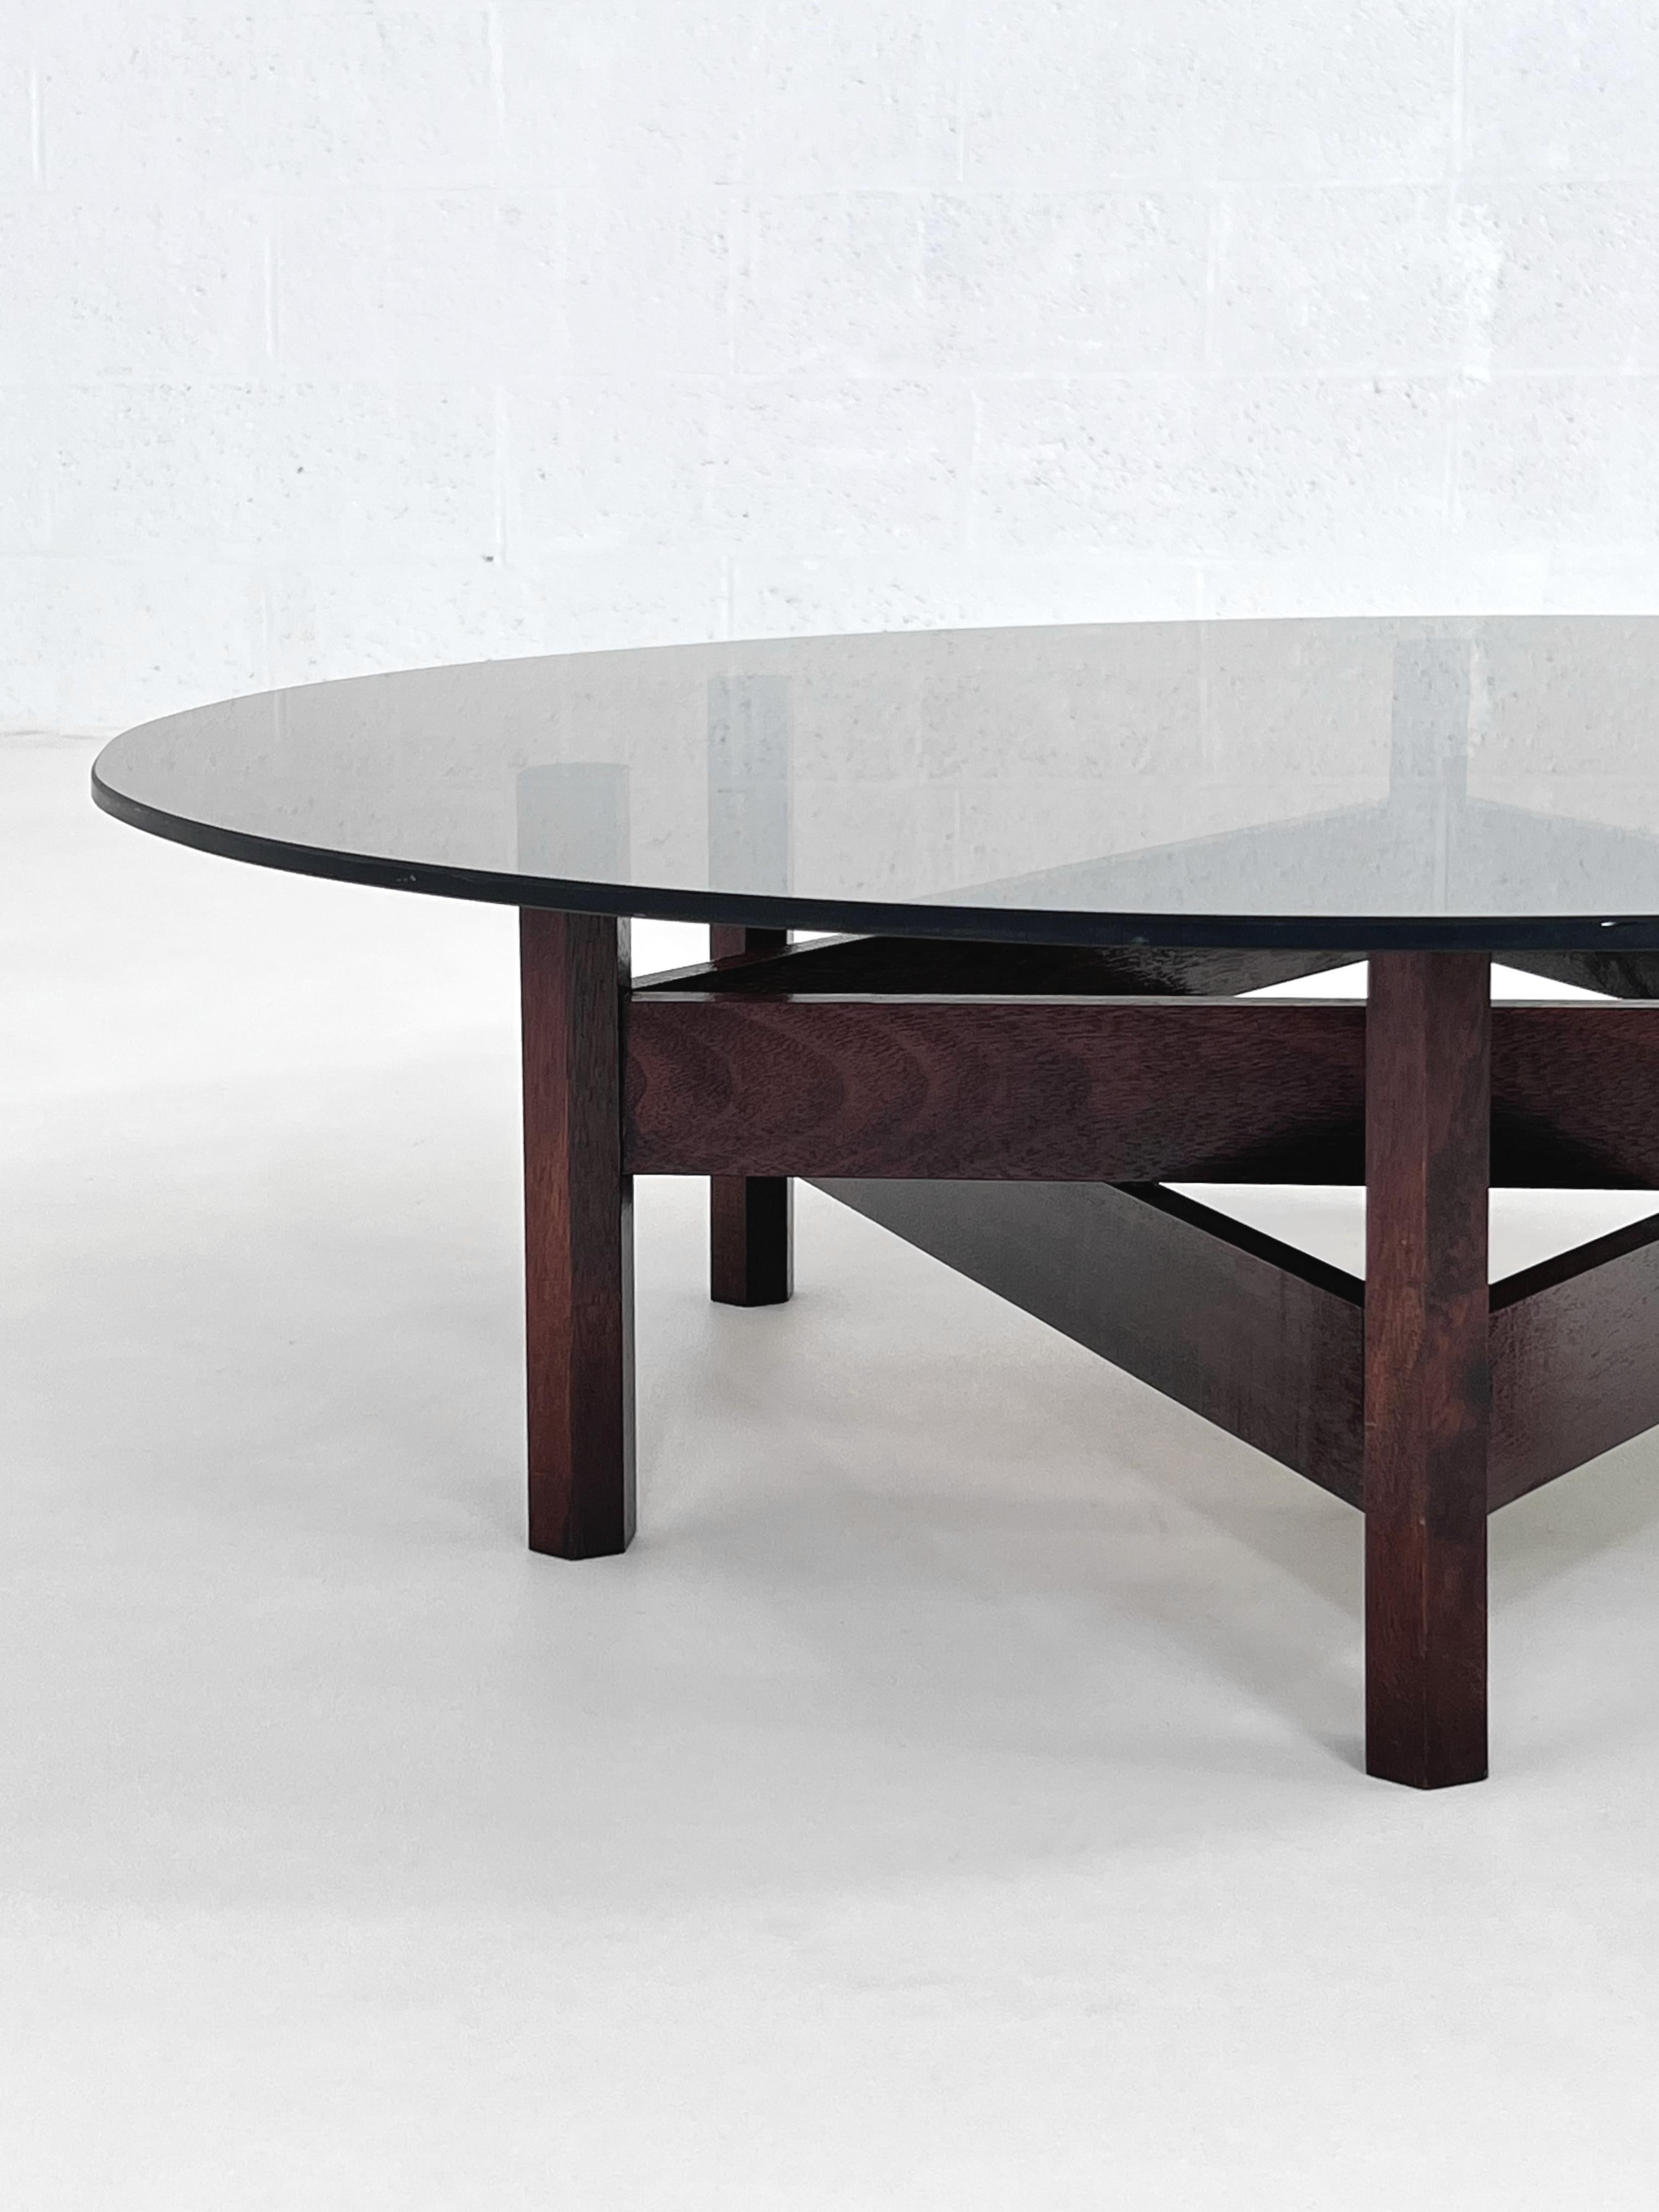 MCM Design Round Glass Top And Star Wooden Base Coffee Table composed of a large round and smoked glass top with a star shaped wooden base.